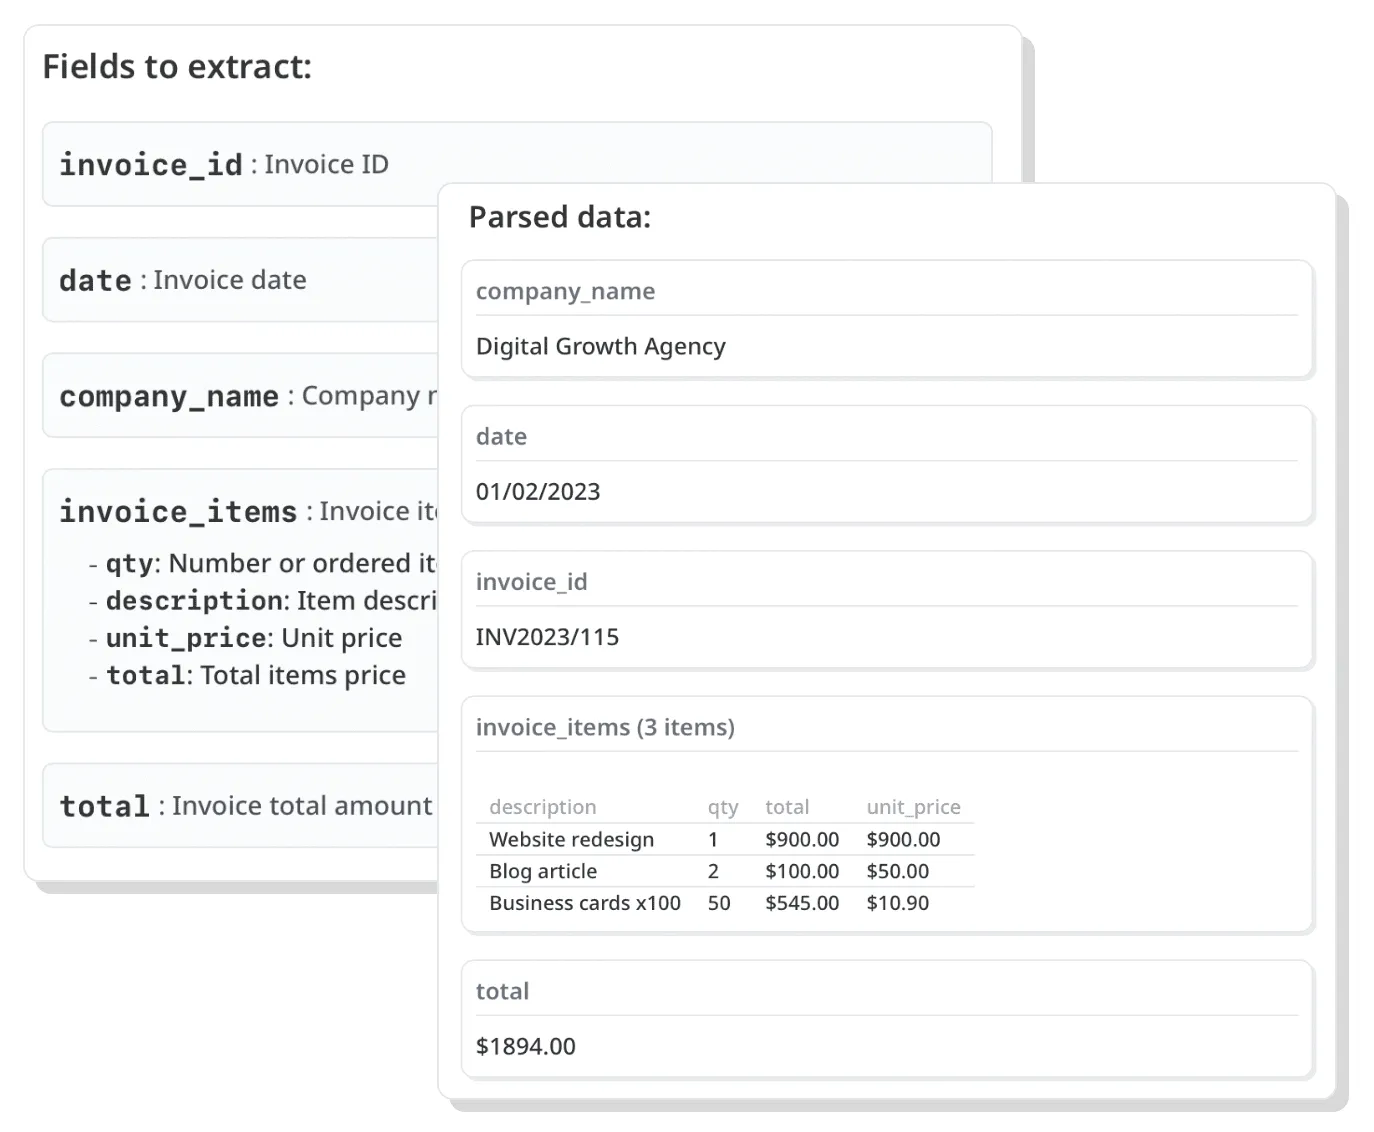 The image displays how the imported PDF invoice was parsed into structured data